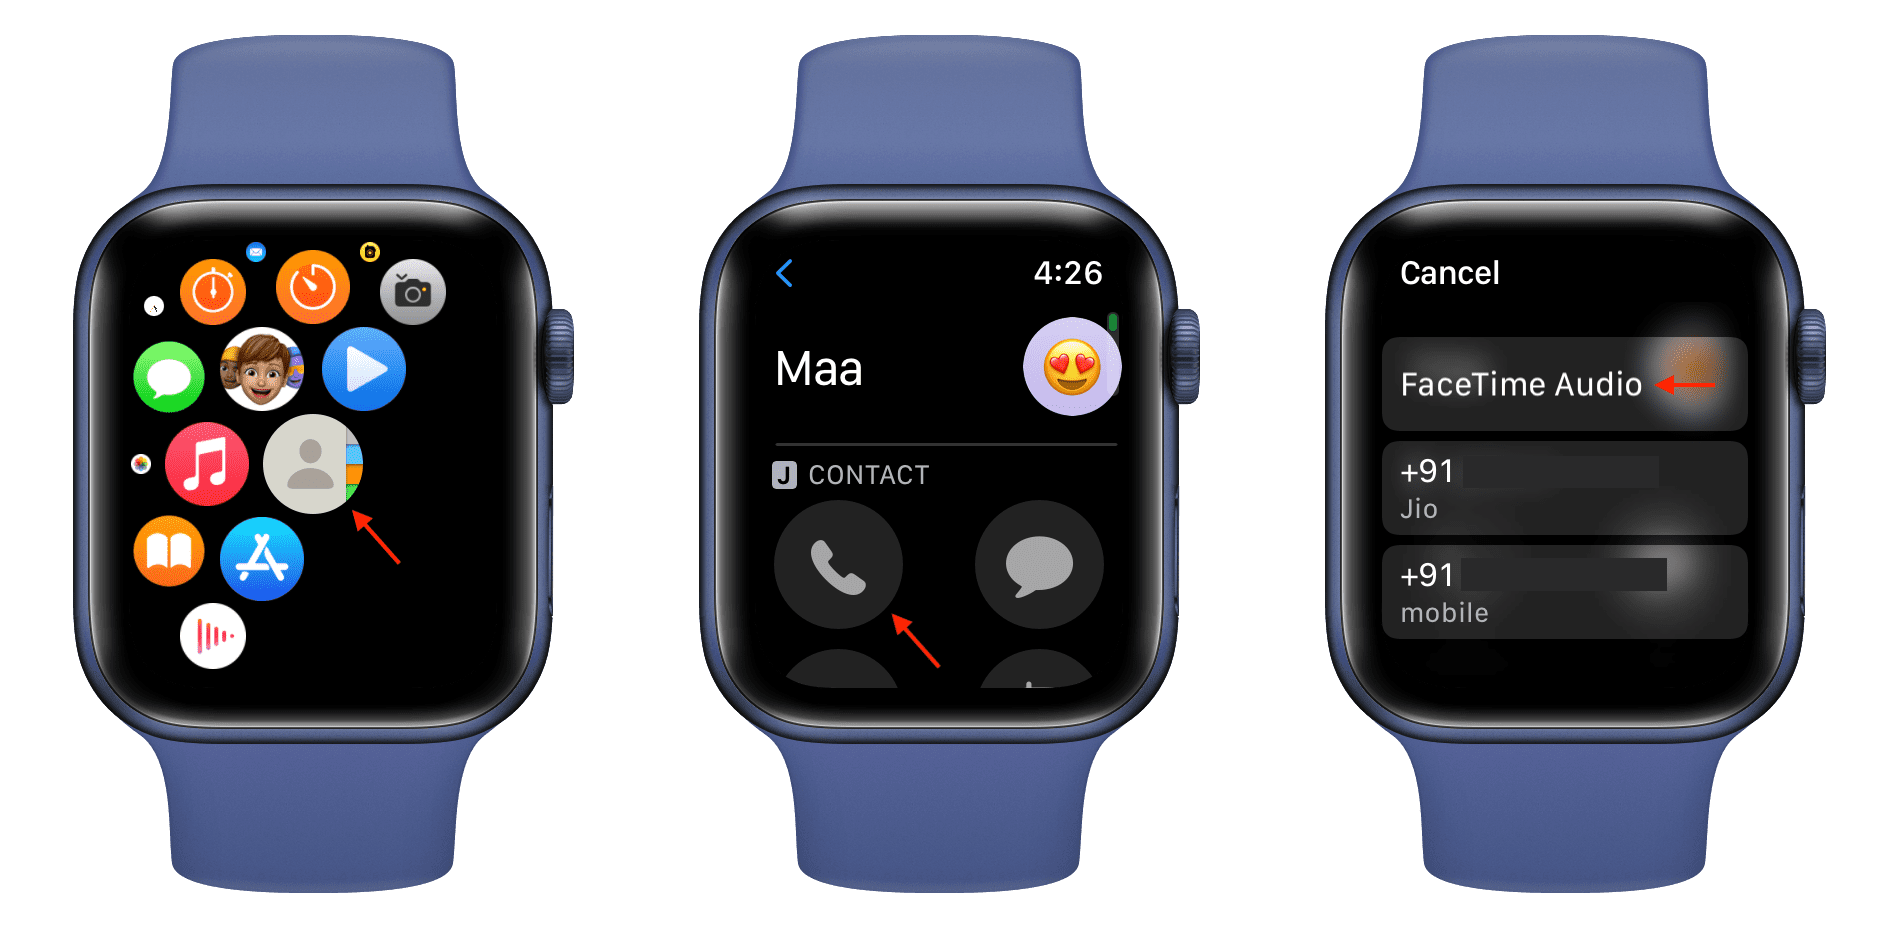 Make FaceTime call on Apple Watch using its Contacts app